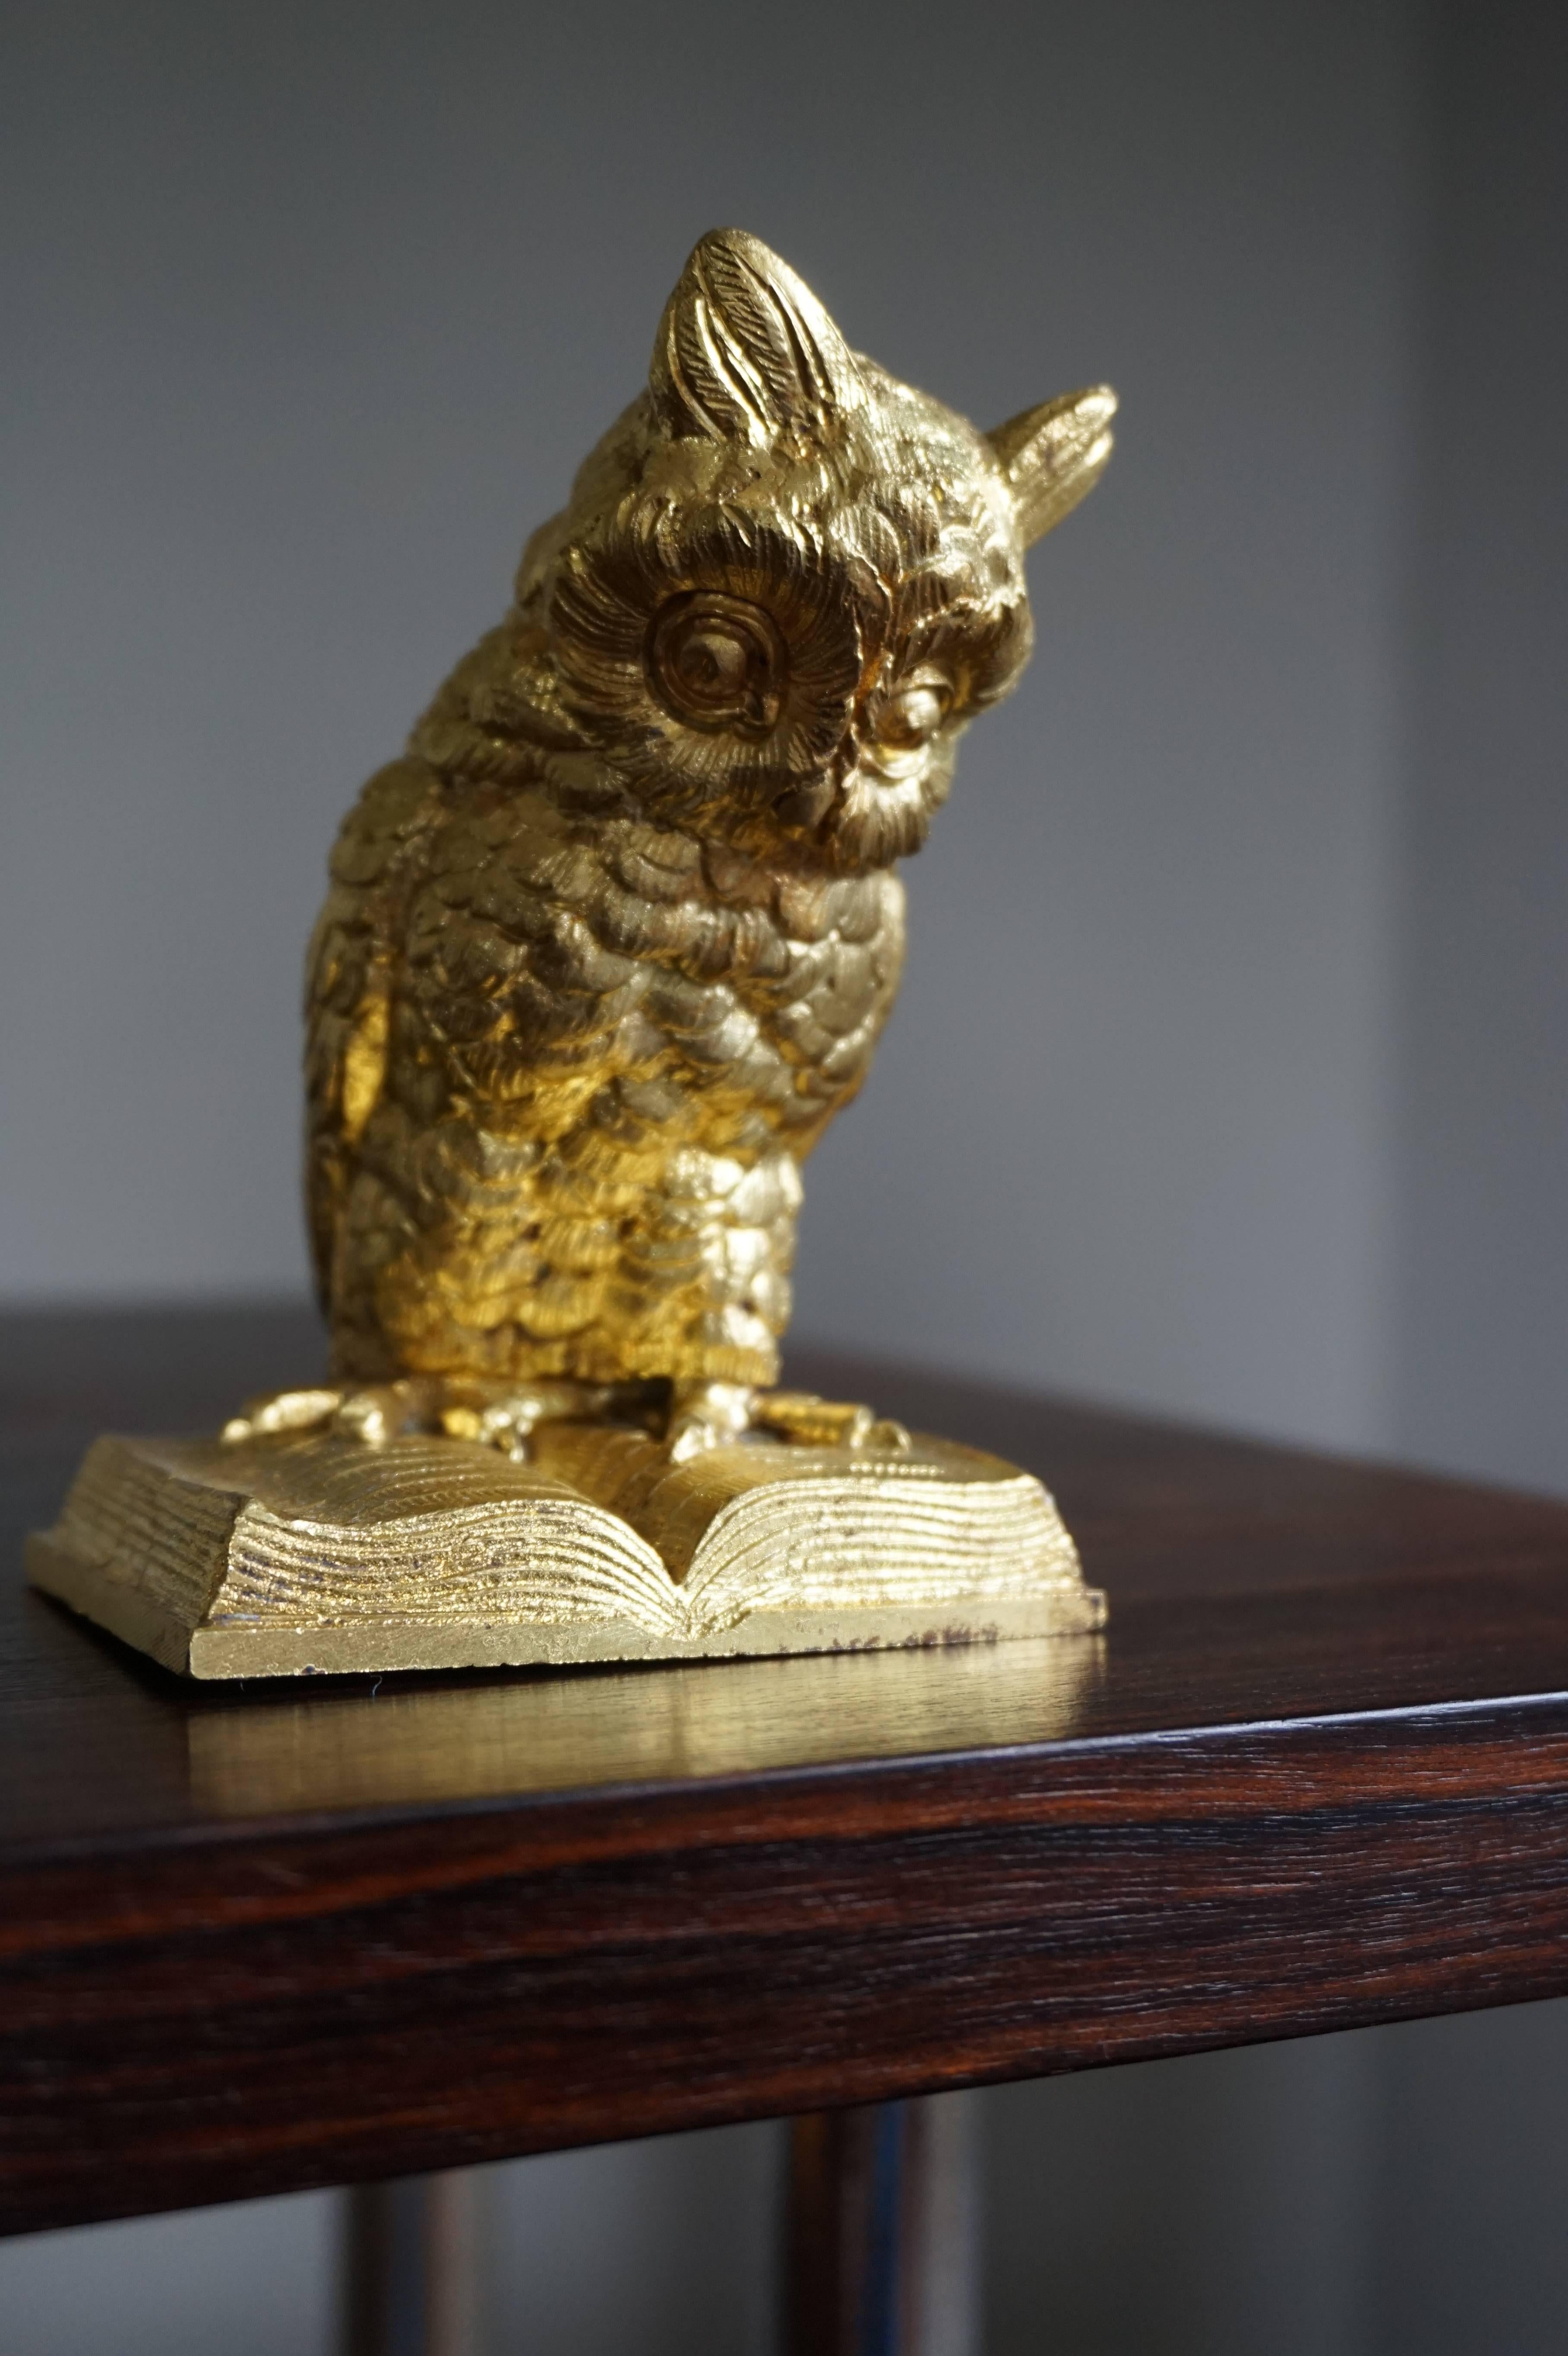 Handcrafted little desk piece with striking gold color.

This small owl sculpture makes a great desk piece and the gilding was probably redone about 20 years ago. This is why this antique little bronze looks just as it would have done about one